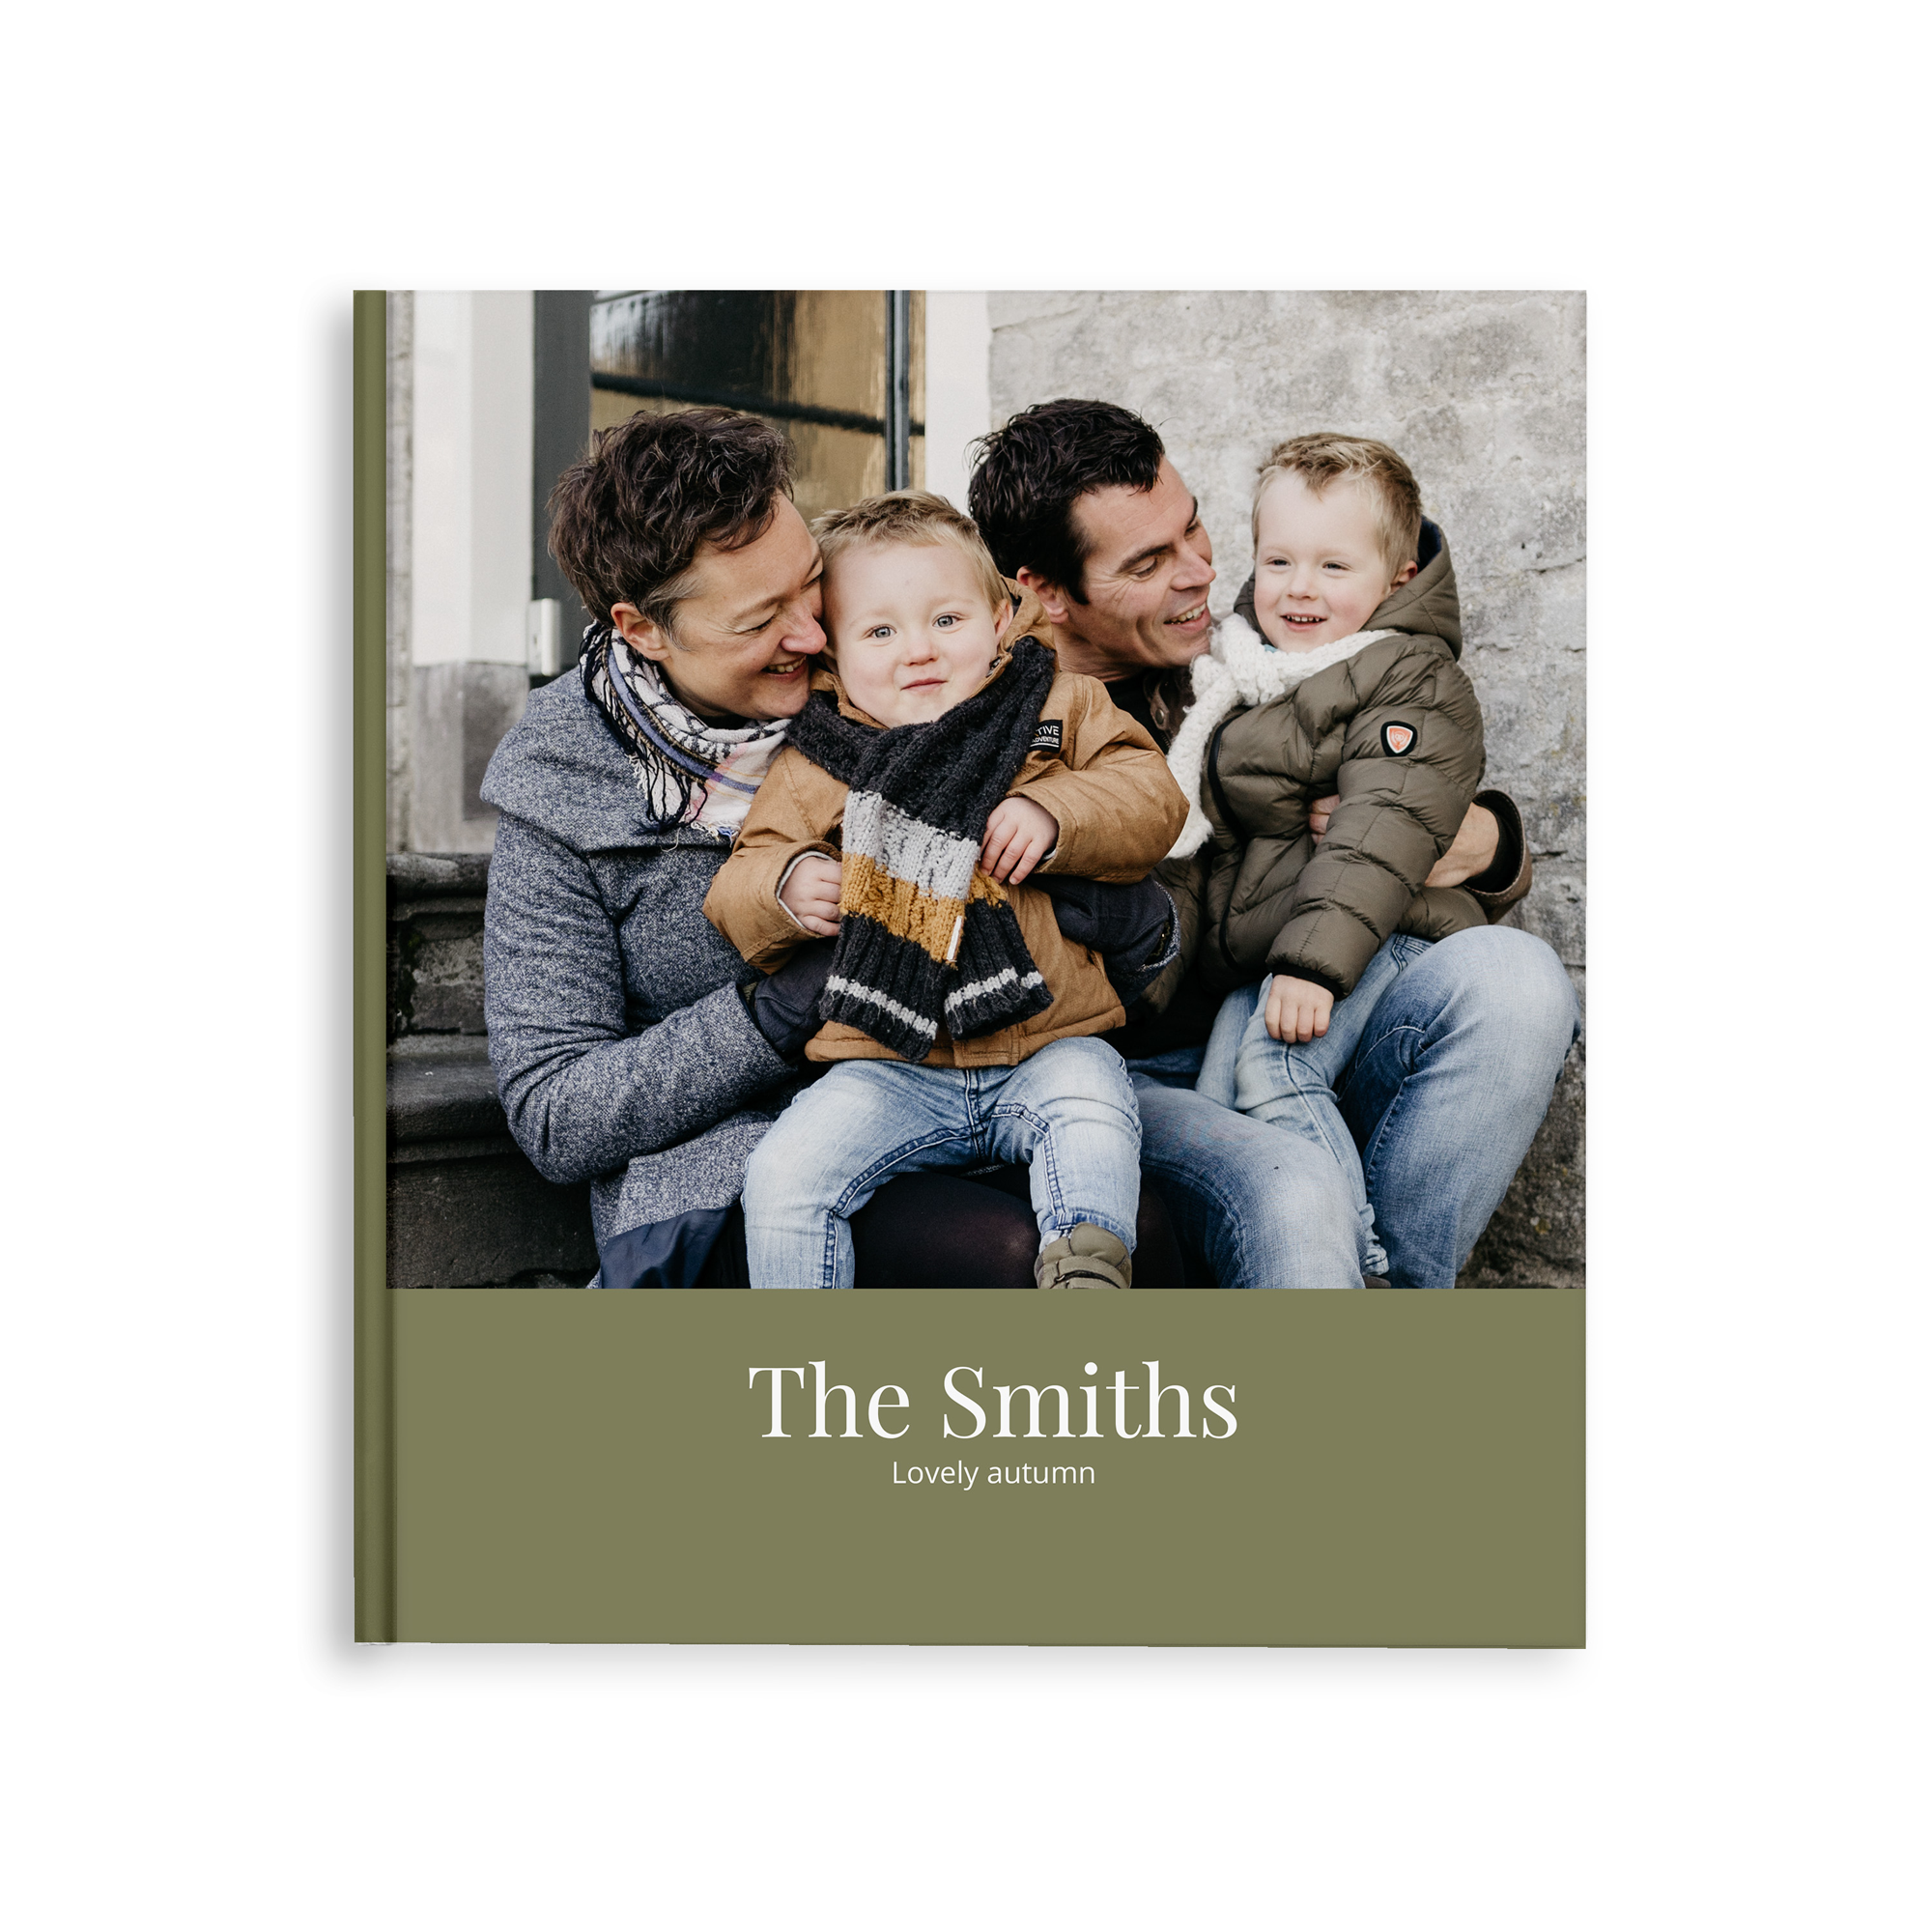 Personalised photo album - L - Hardcover - 20 pages